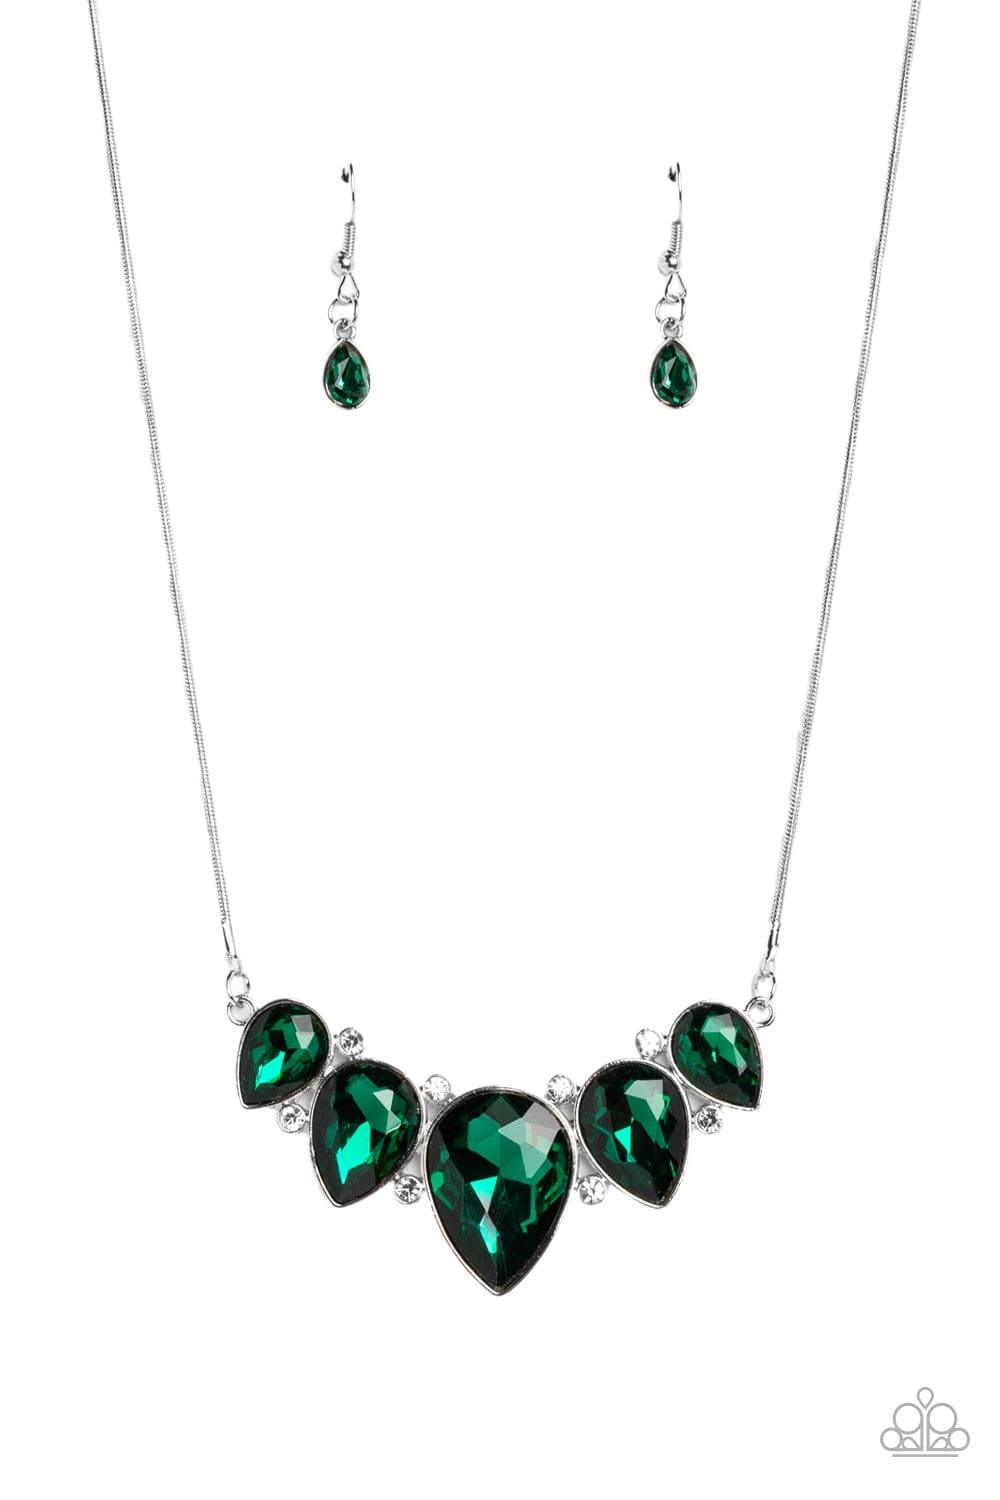 Paparazzi Accessories - Regally Refined - Green Necklace - Bling by JessieK